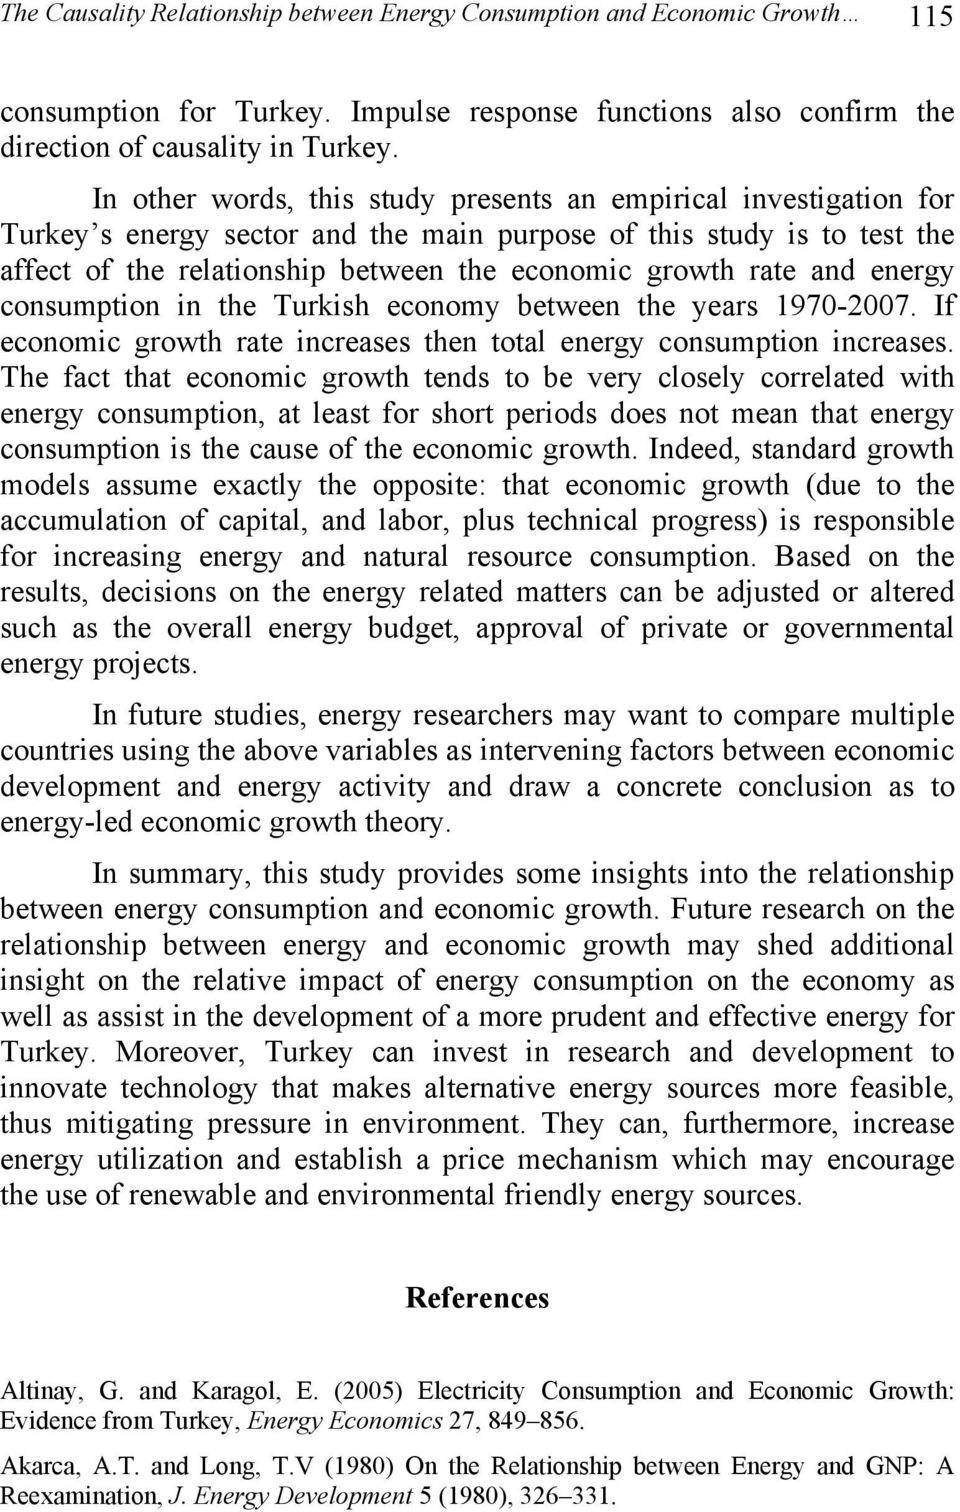 and energy consumption in the Turkish economy between the years 1970-2007. If economic growth rate increases then total energy consumption increases.